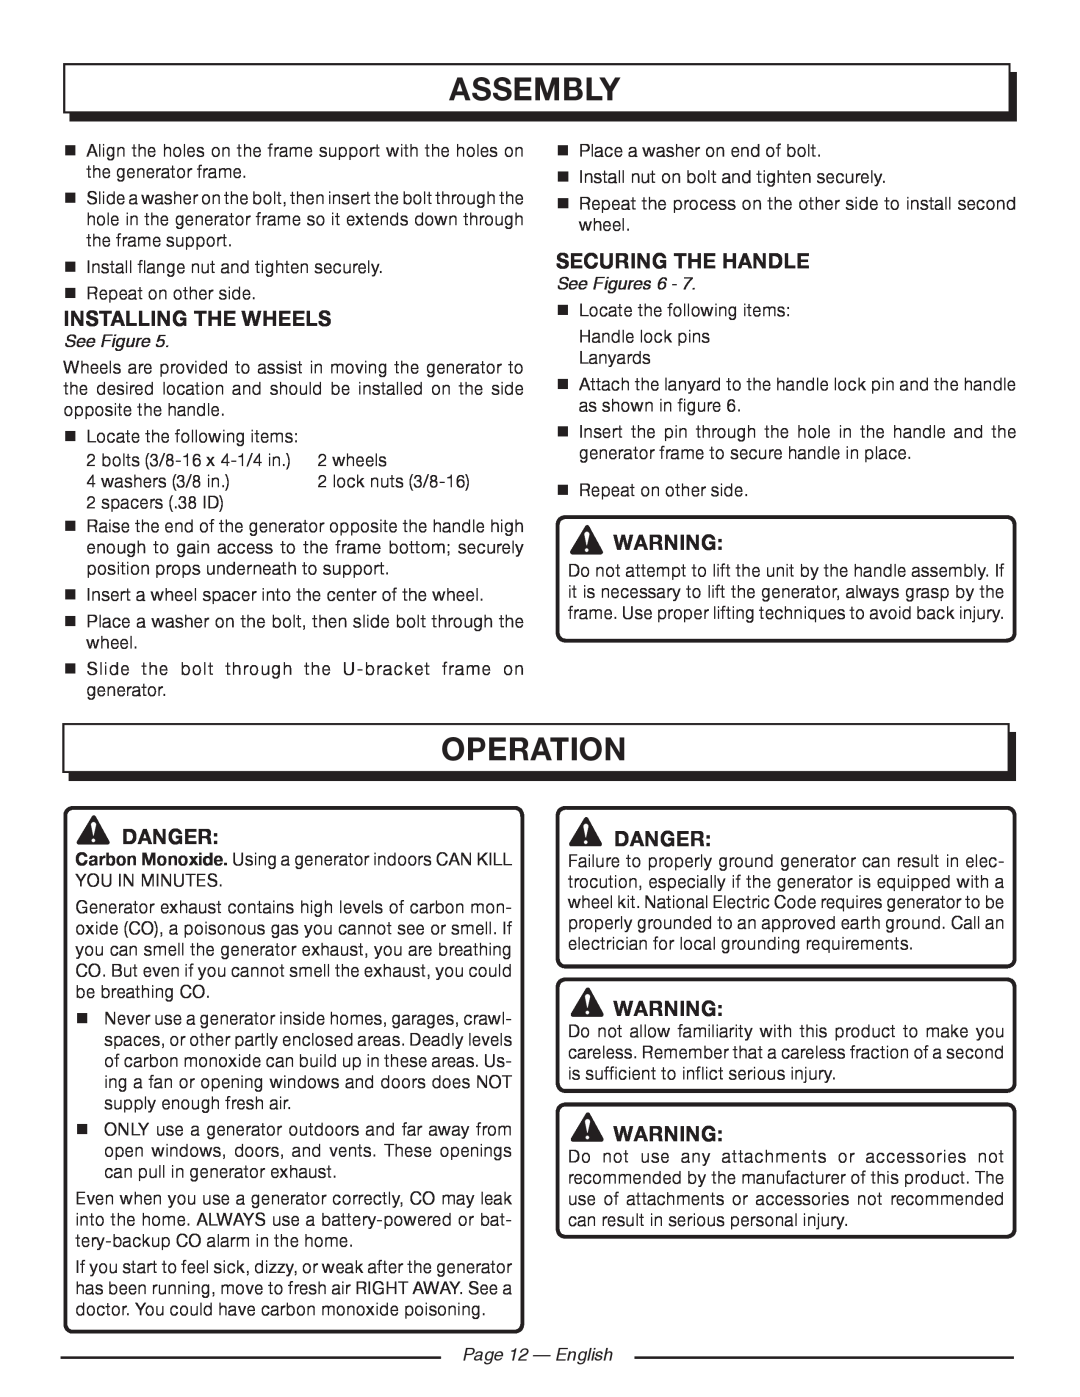 Homelite HGCA5700 operation, installing the wheels, securing the handle, danger, See Figures 6, Page 12 — English, Danger 